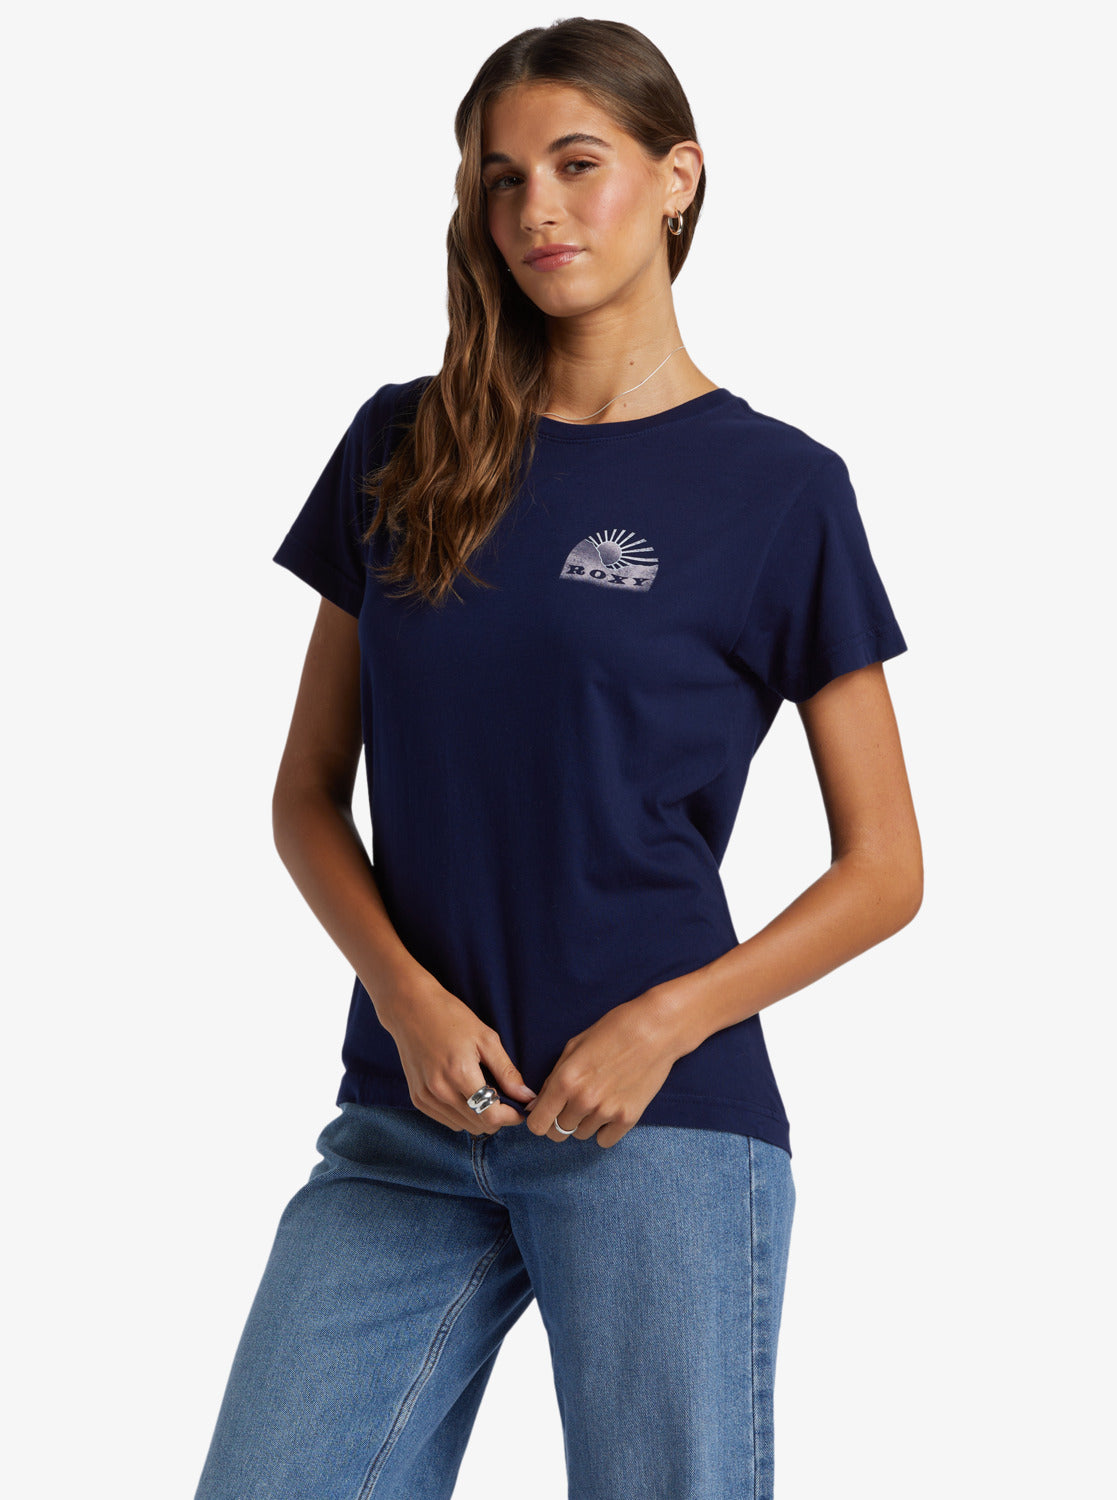 Get Lost In The Moment Boyfriend T-Shirt - Naval Academy